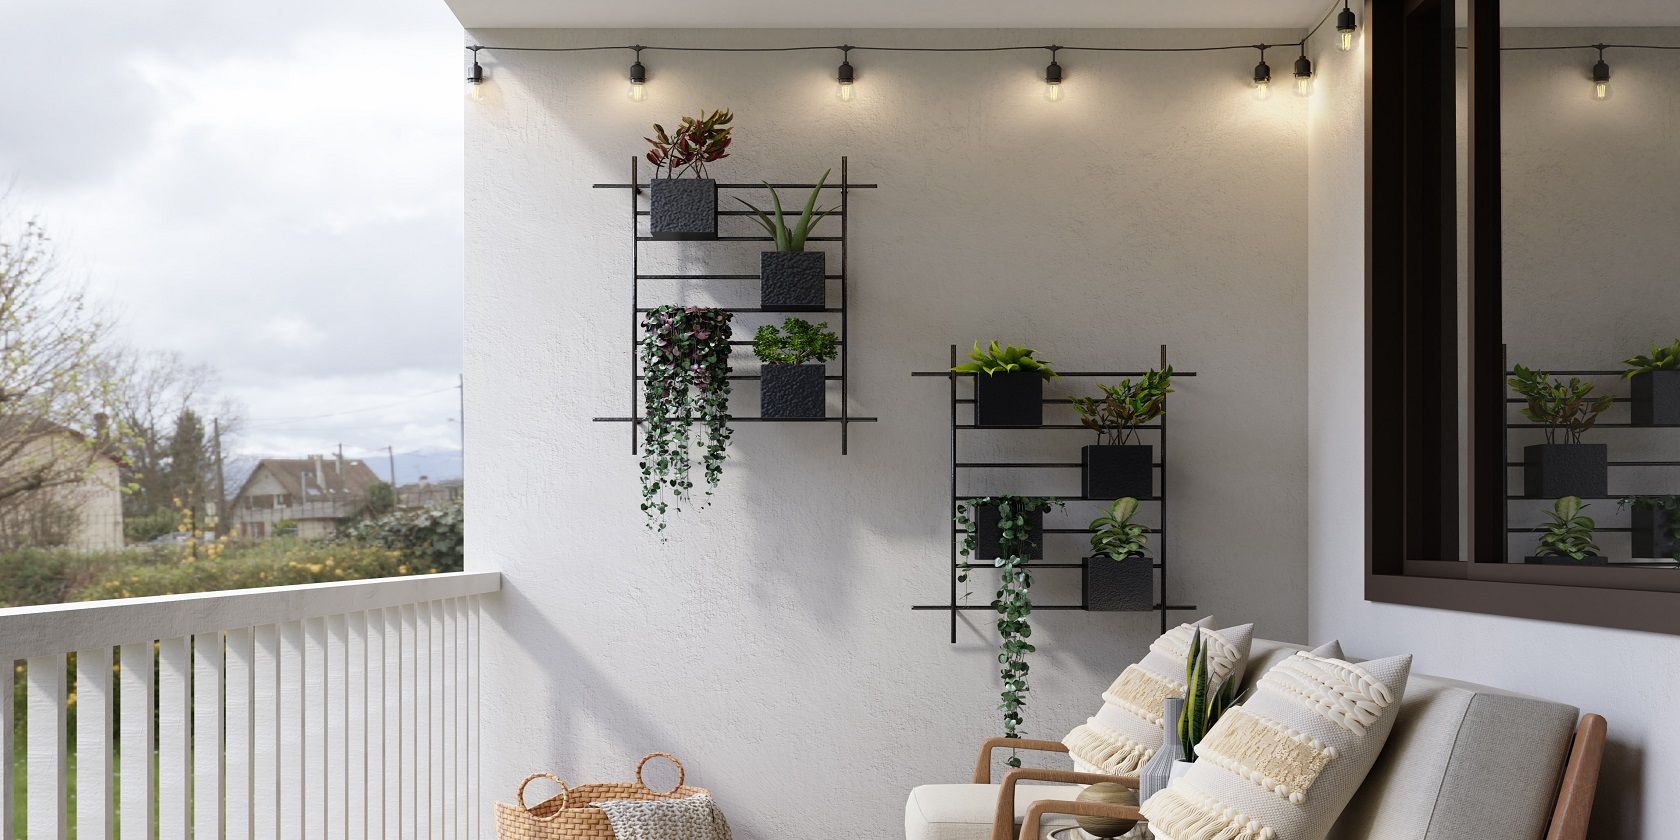 Balcony with hanging plants, seats, and cool lights